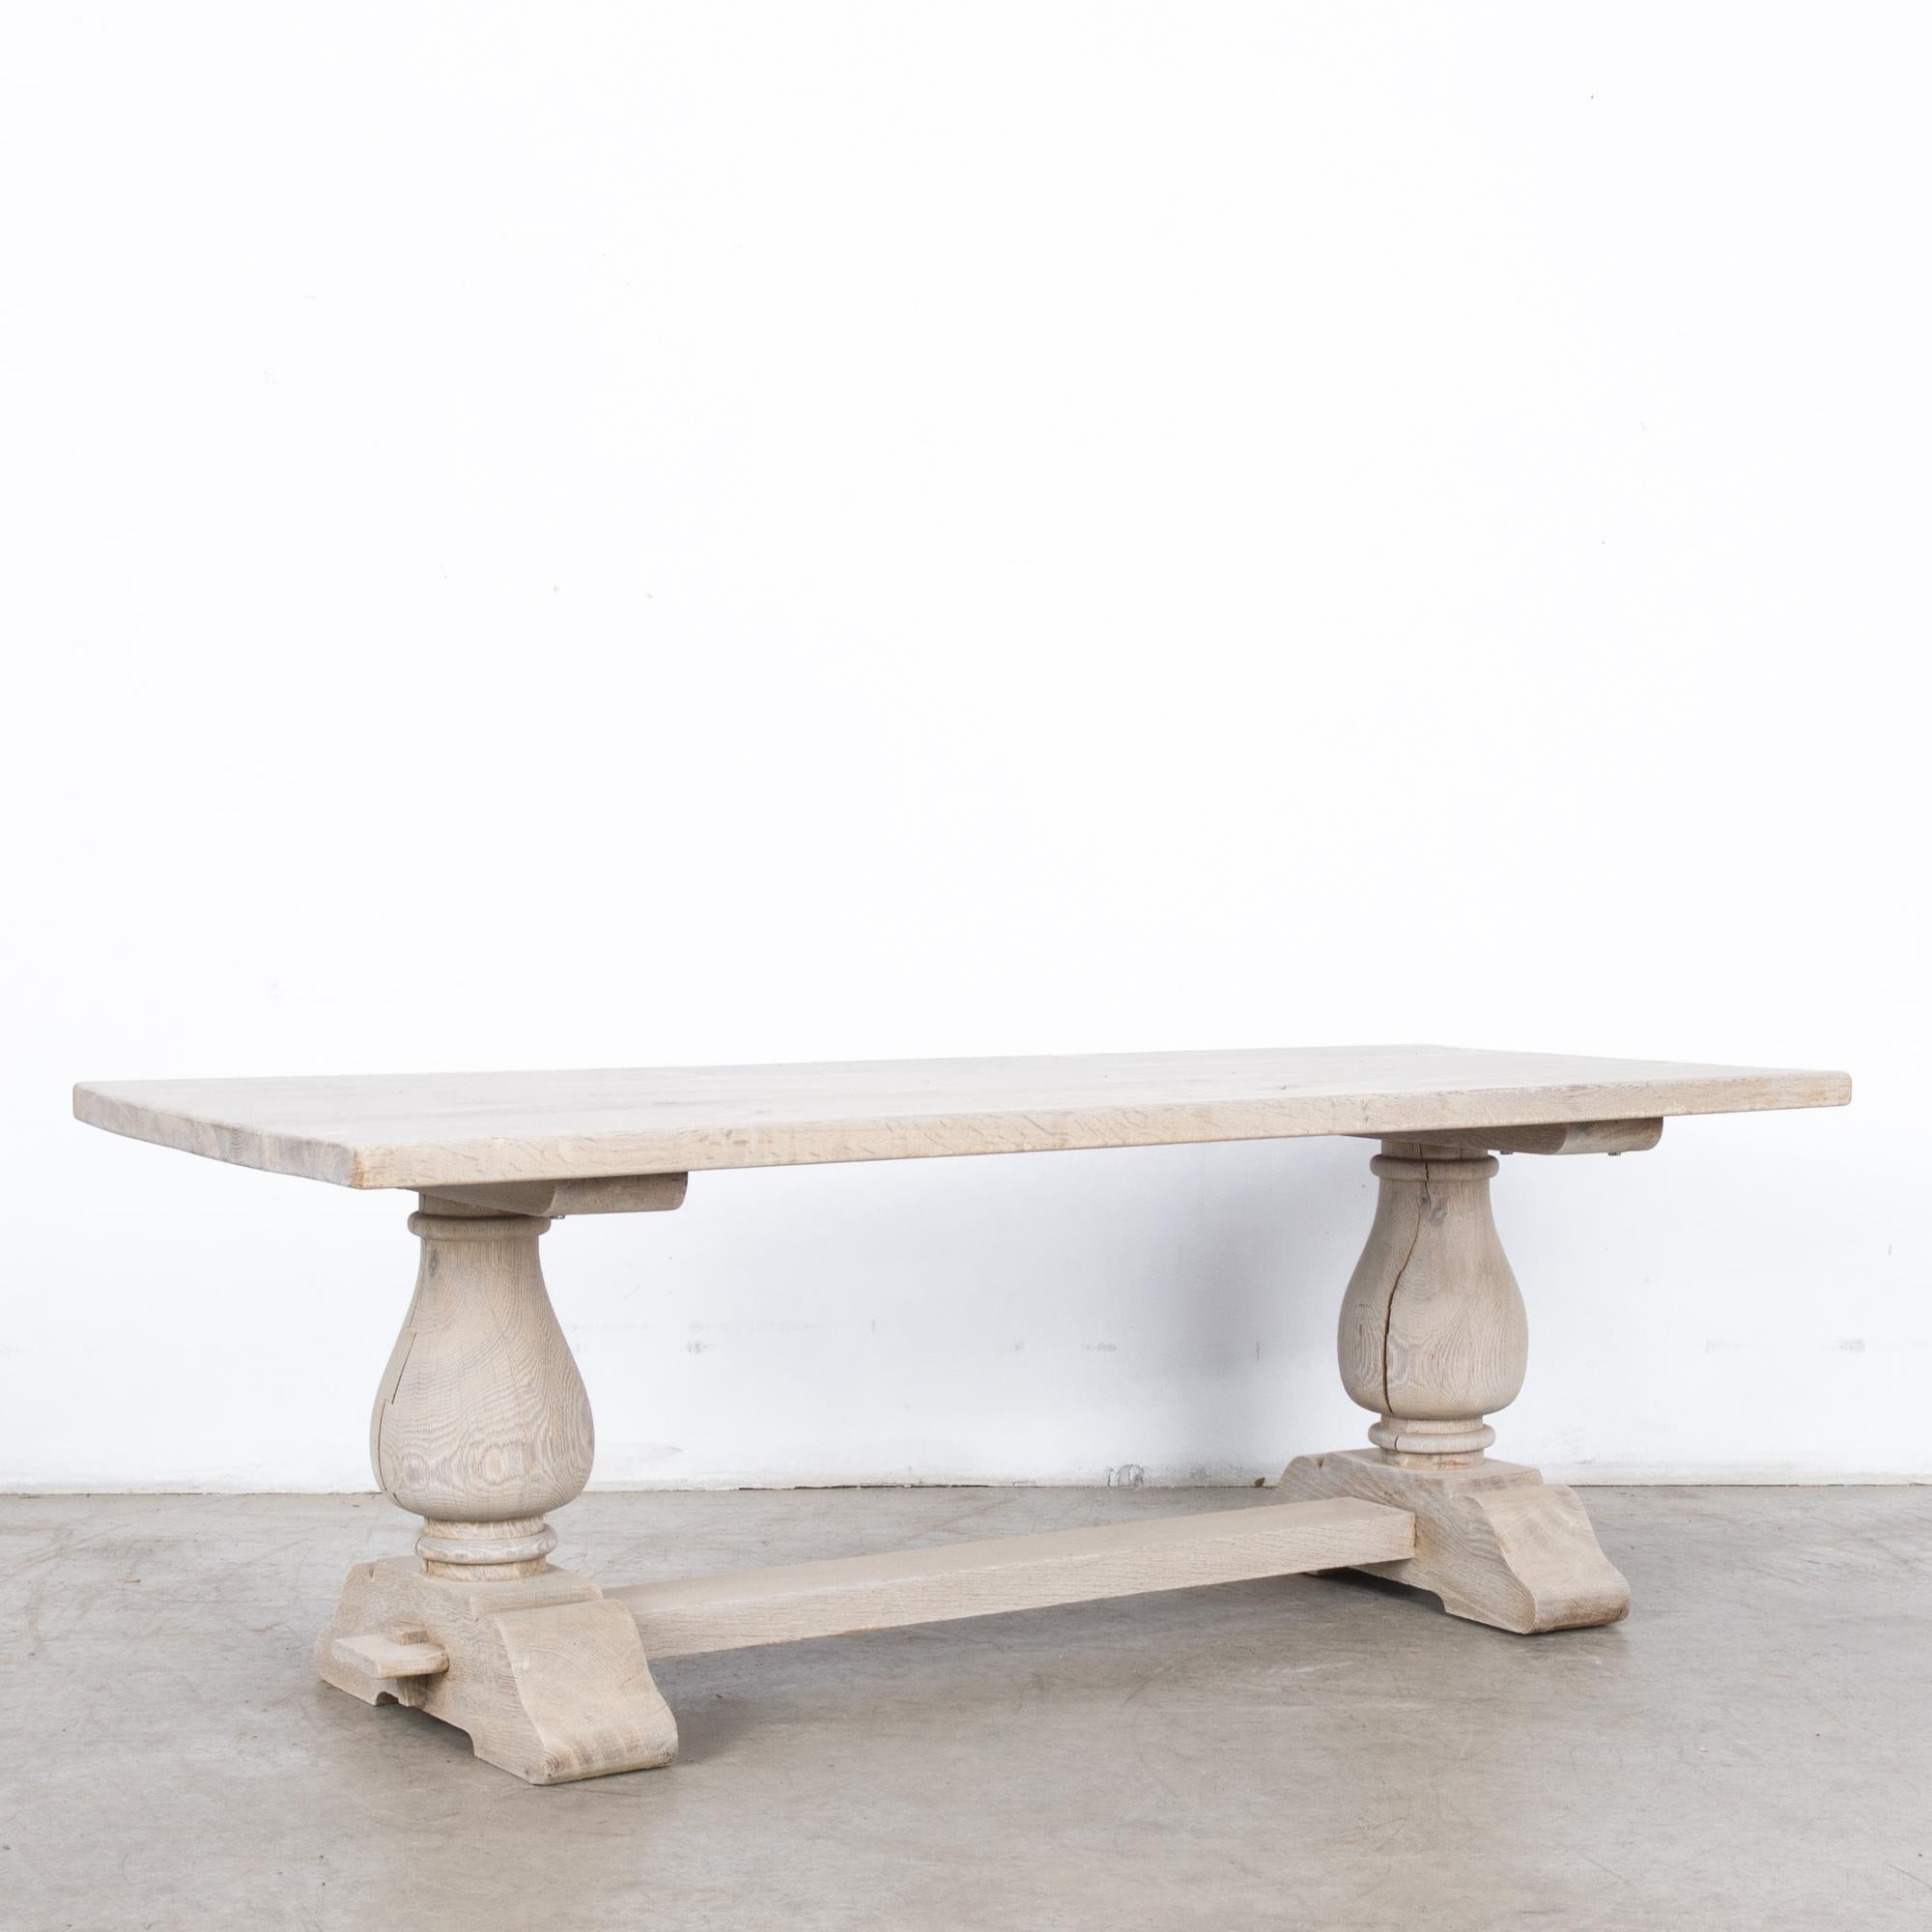 French Provincial 1950s Belgian Bleached Oak Table with Tulip Trestle Legs